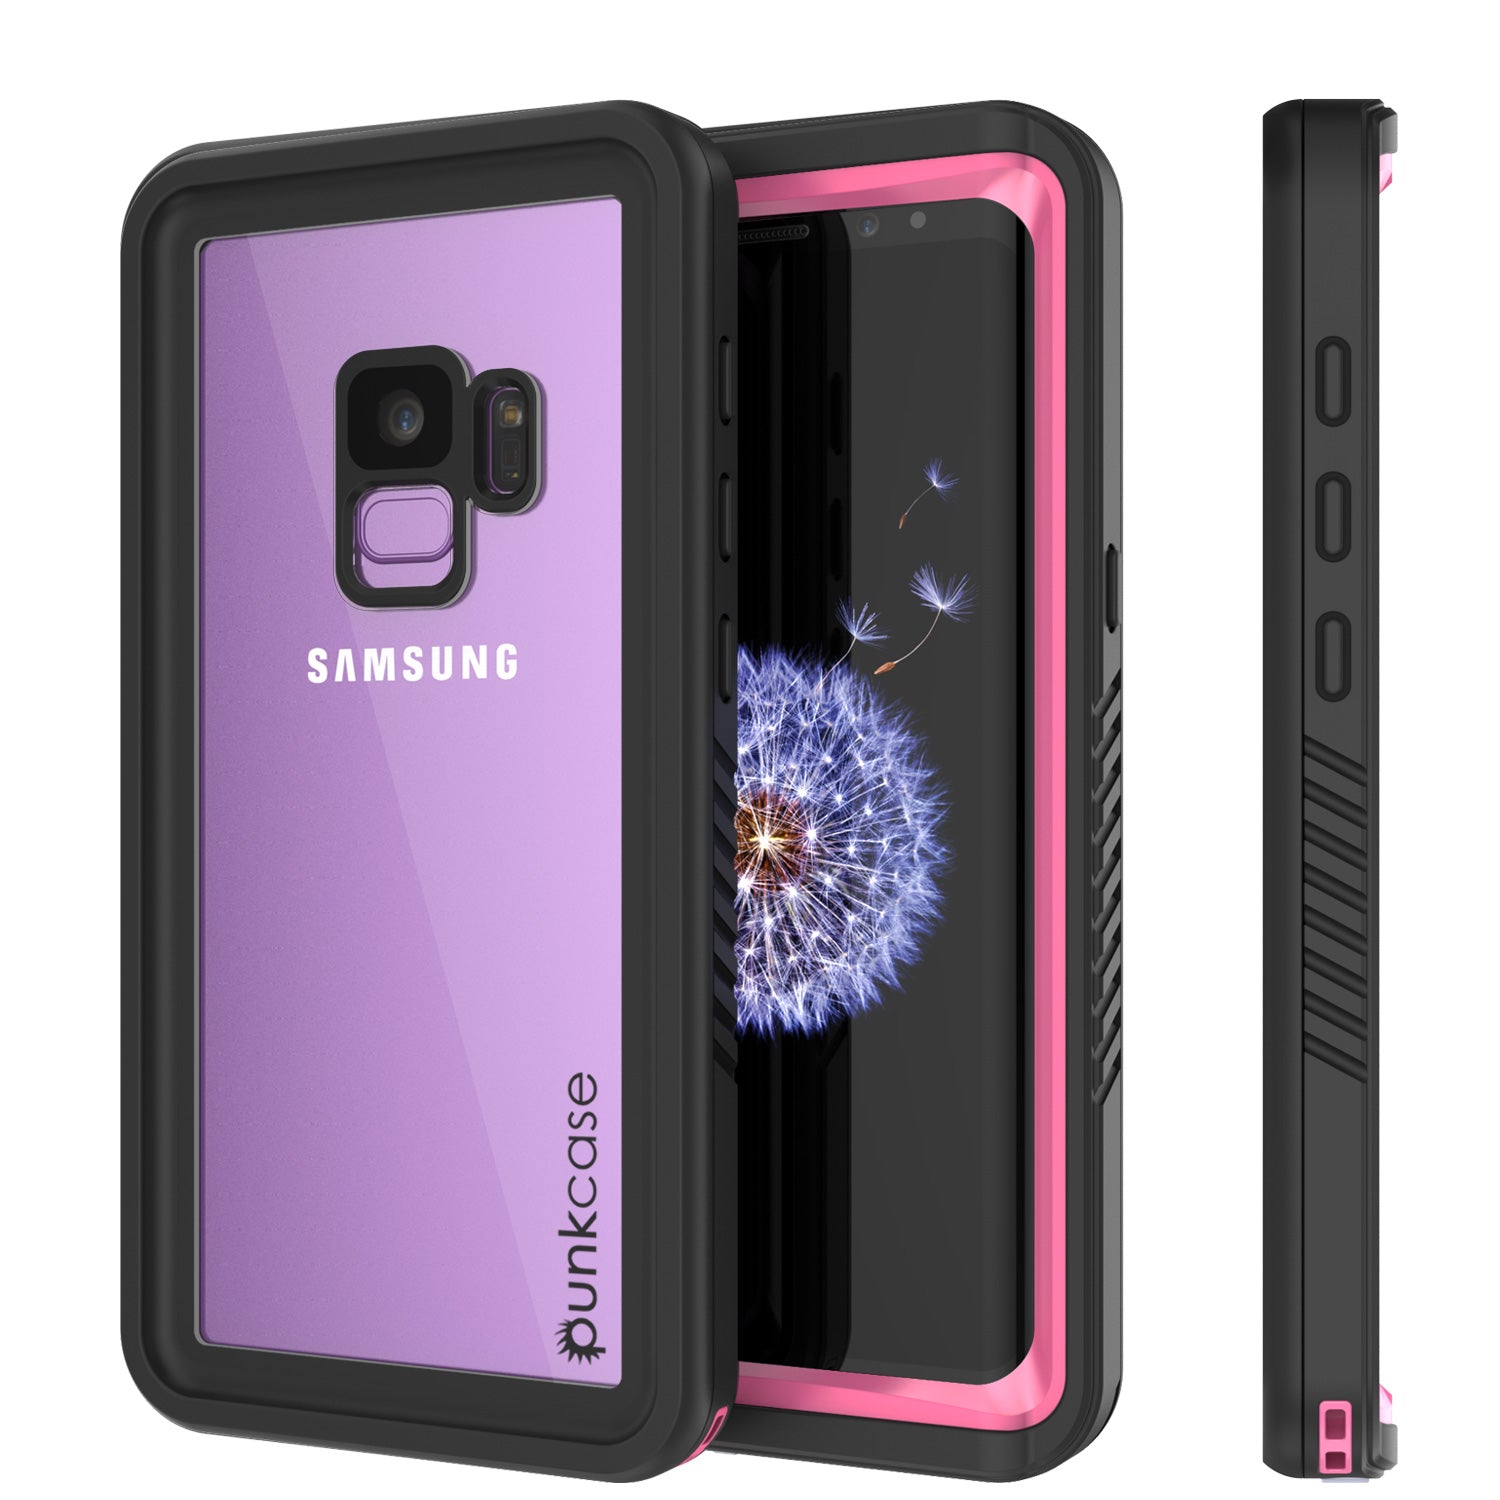 Galaxy S9 Waterproof Case, Punkcase [Extreme Series] [Slim Fit] [IP68 Certified] [Shockproof] [Snowproof] [Dirproof] Armor Cover W/ Built In Screen Protector for Samsung Galaxy S9 [Pink]